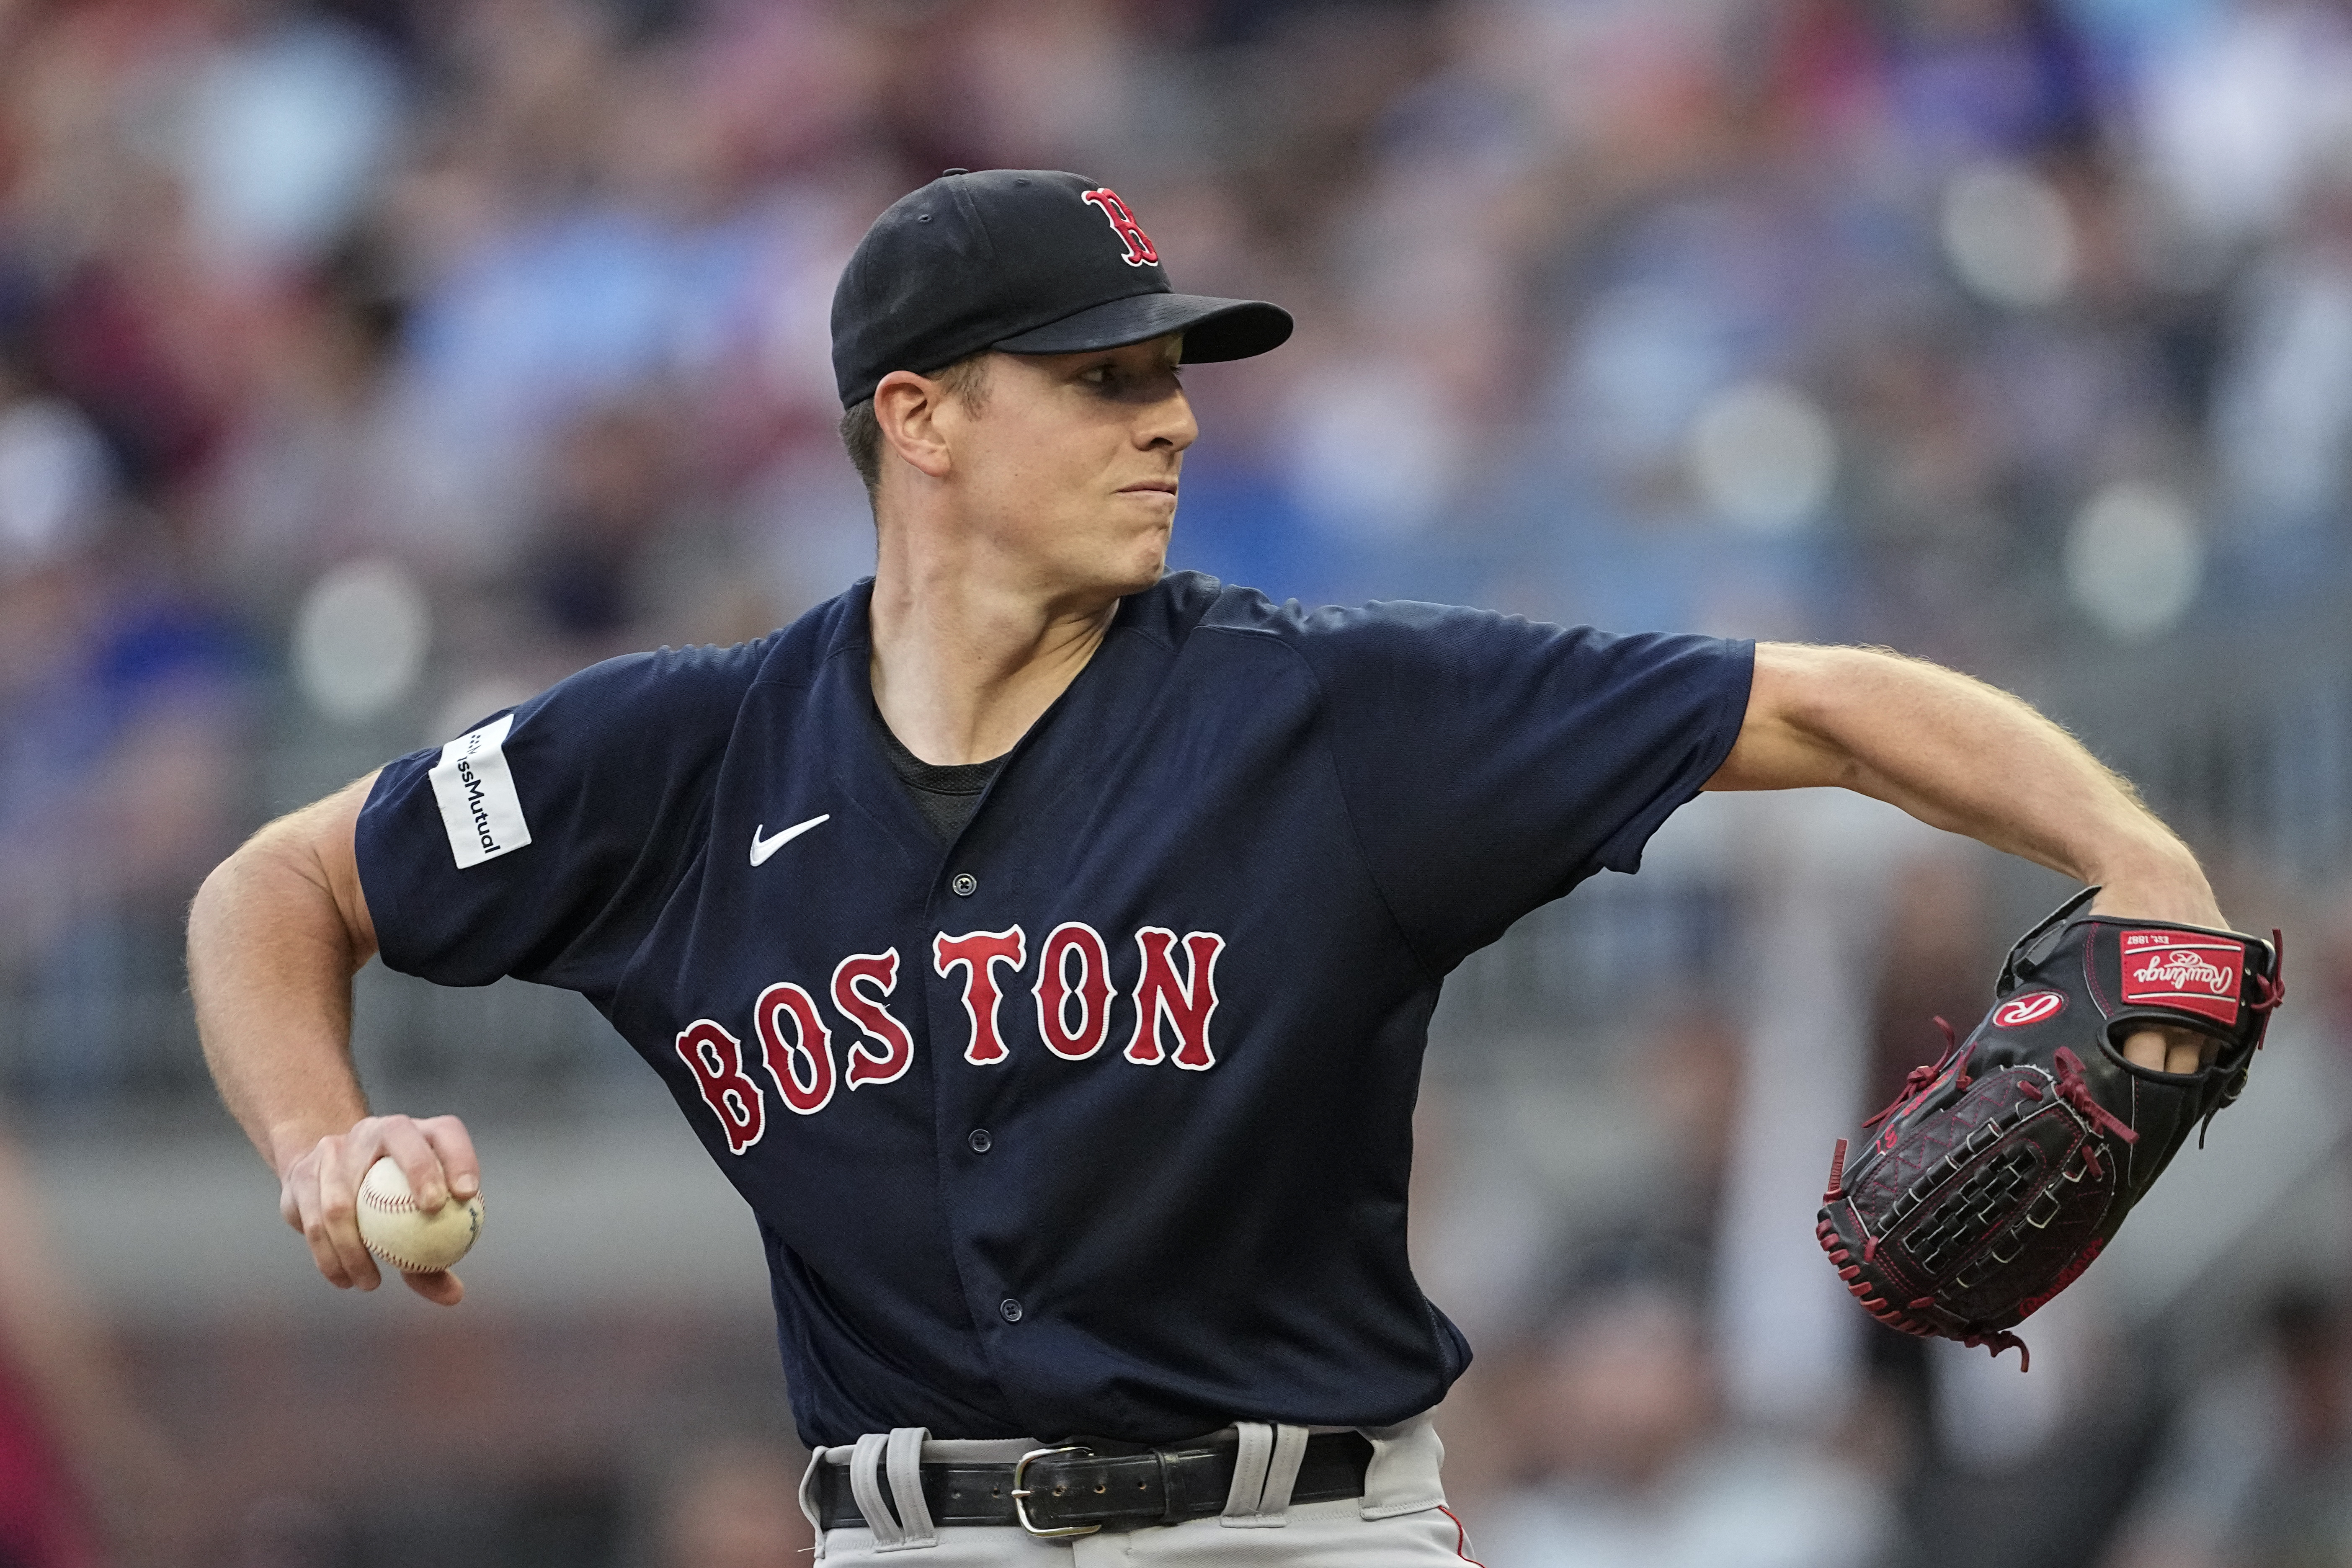 Brayan Bello helps Red Sox to series win, Nick Pivetta moves to bullpen